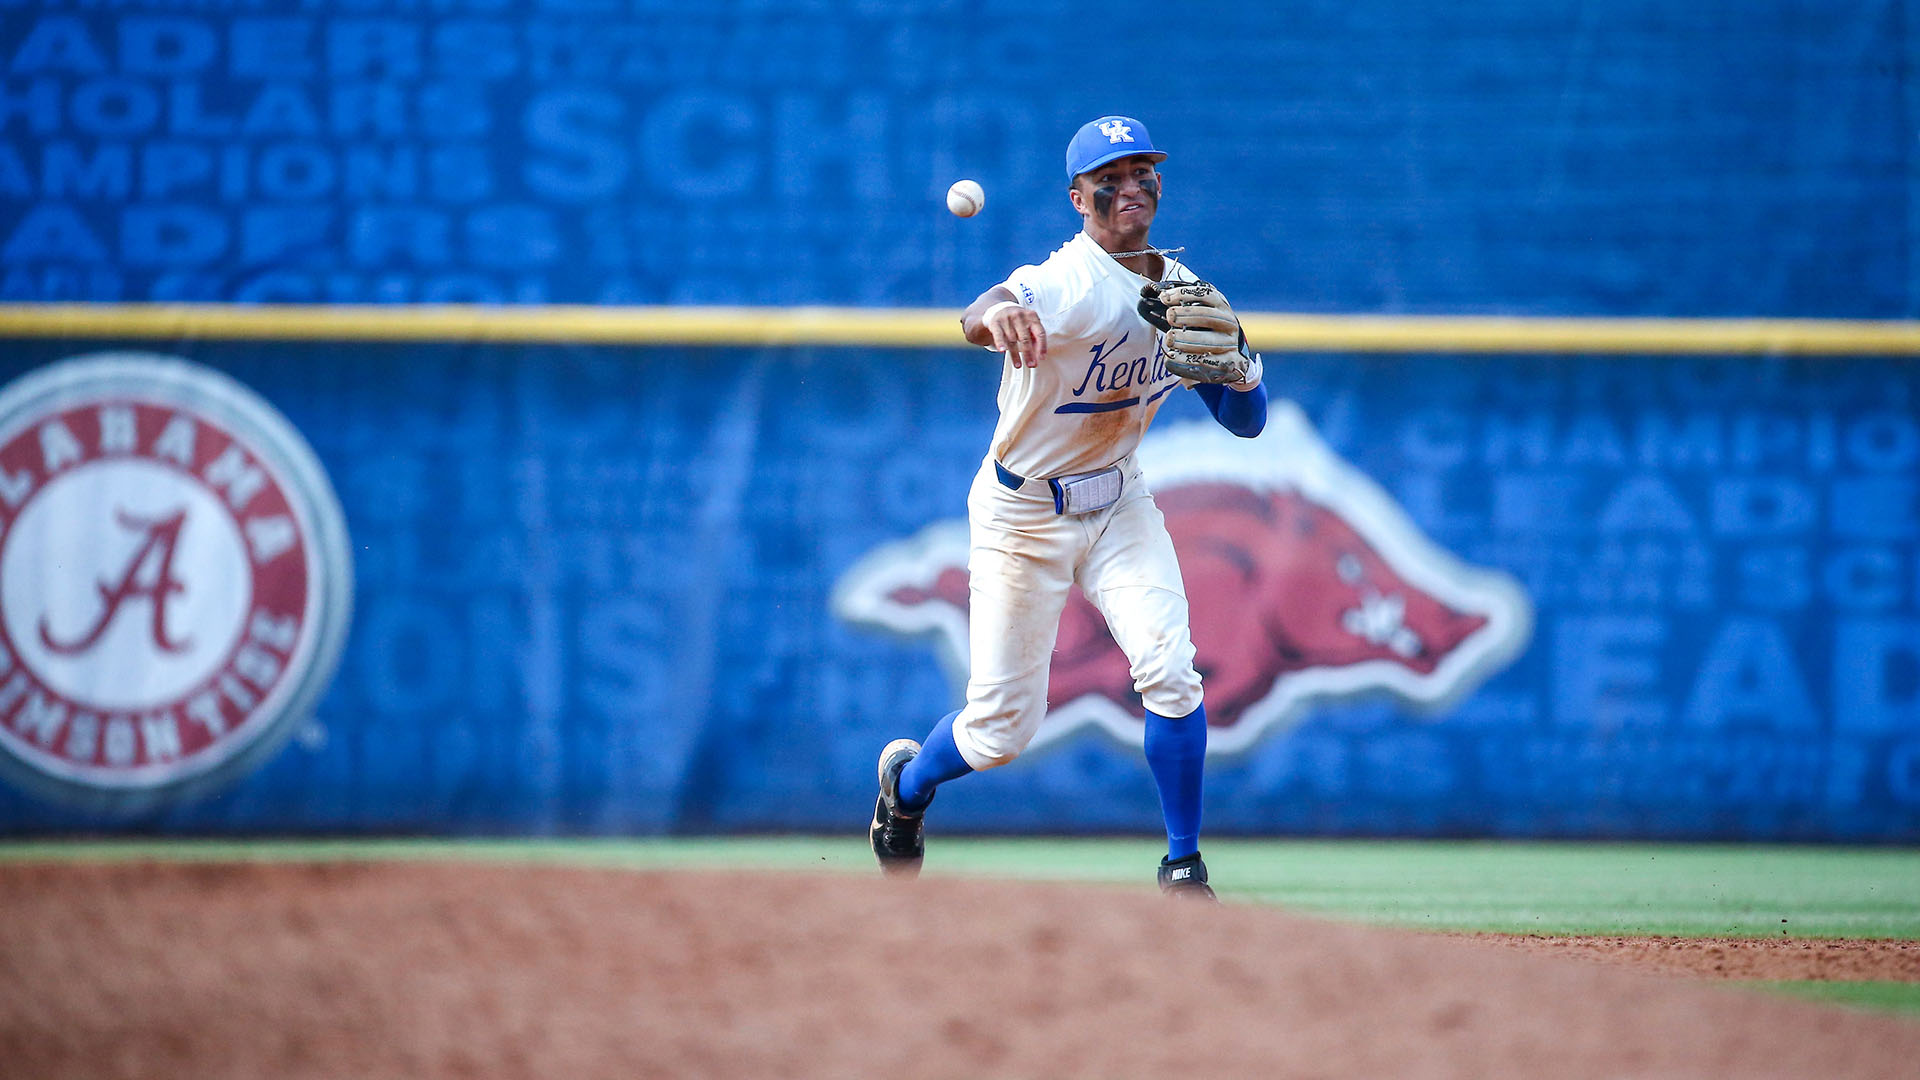 Ryan Ritter Selected in Fourth Round of 2022 MLB Draft